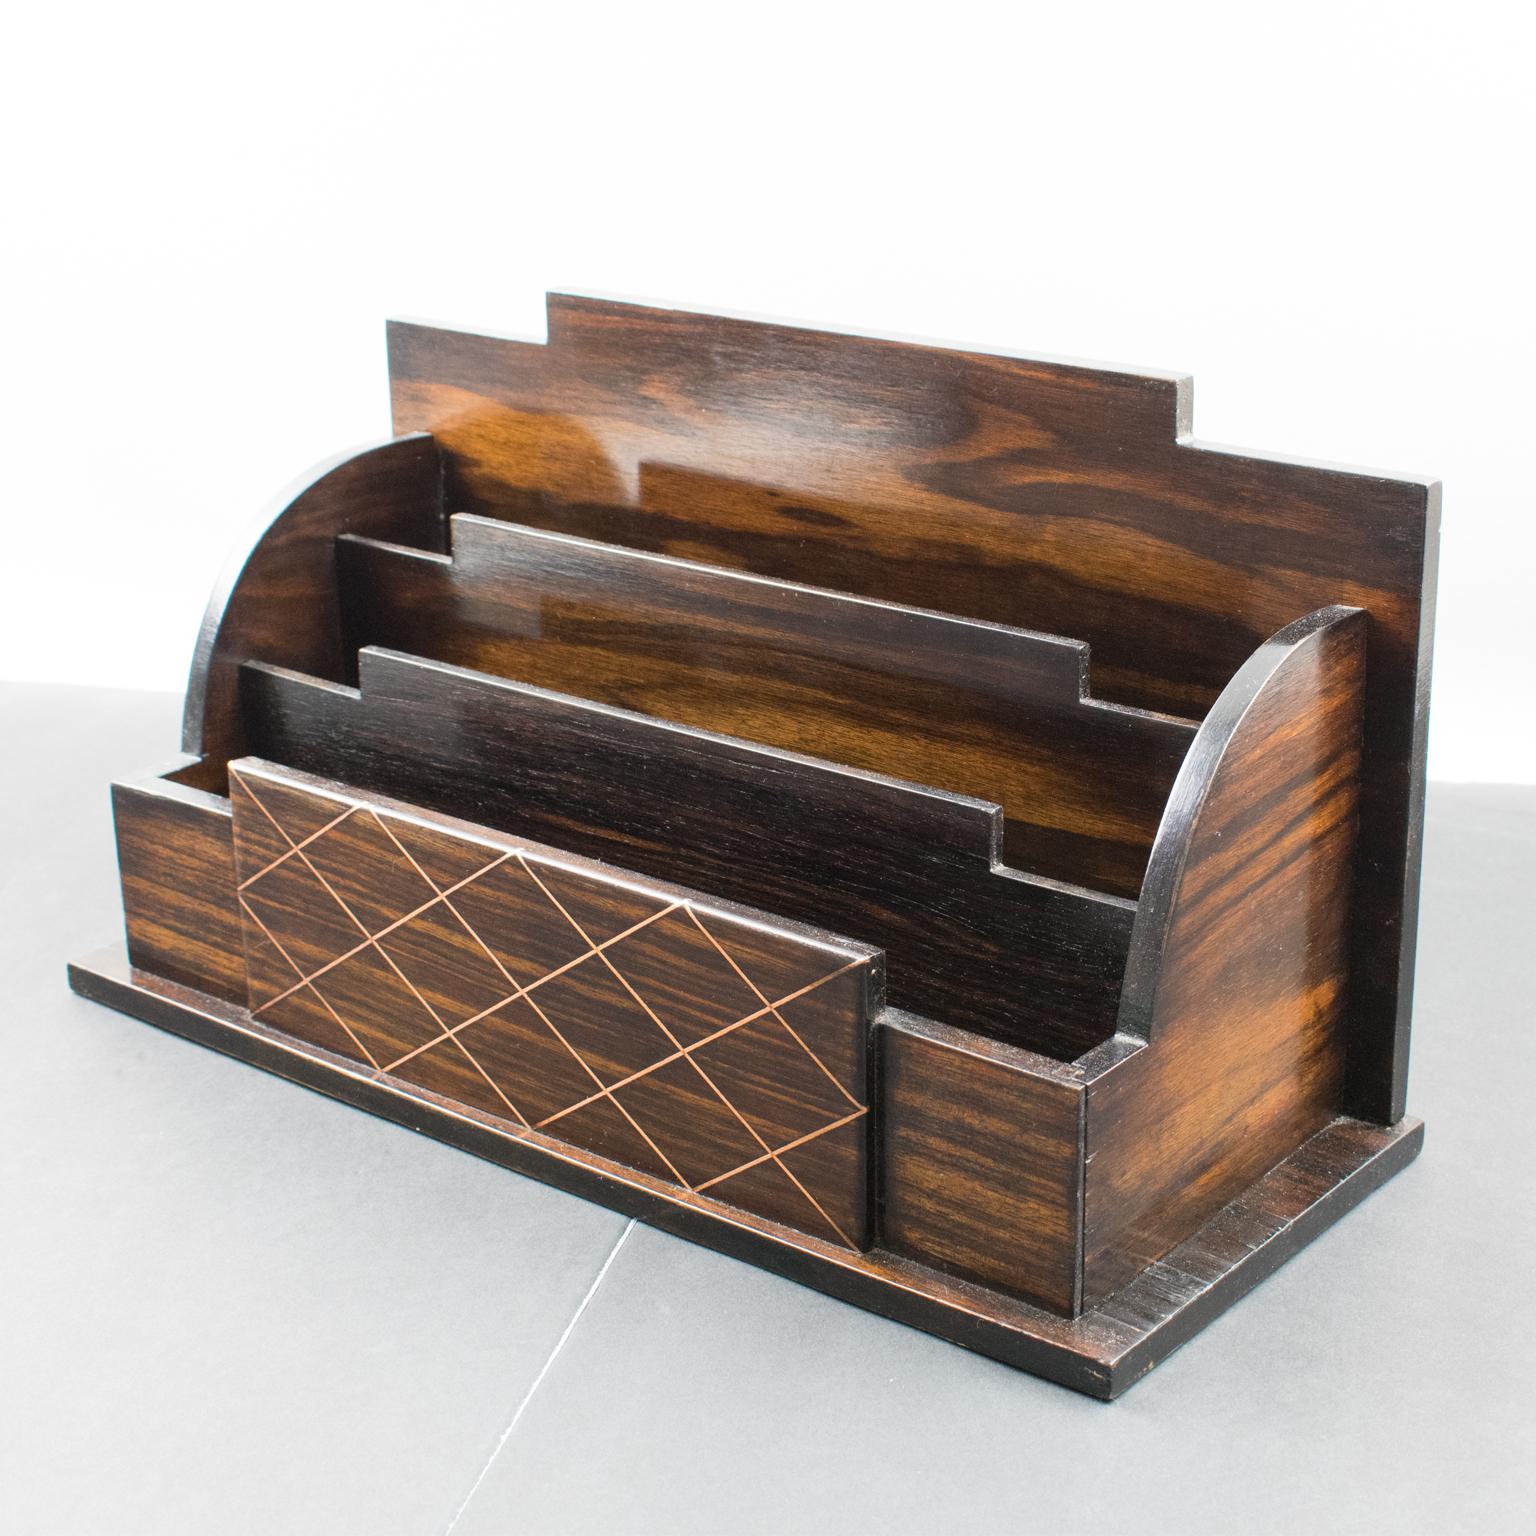 This elegant Art Deco modernist desktop accessory, a letter holder, was designed and crafted in France in the 1930s. With its typical Art Deco geometric shape, the mail accessory is made of Macassar wood veneer and copper metal pattern with a